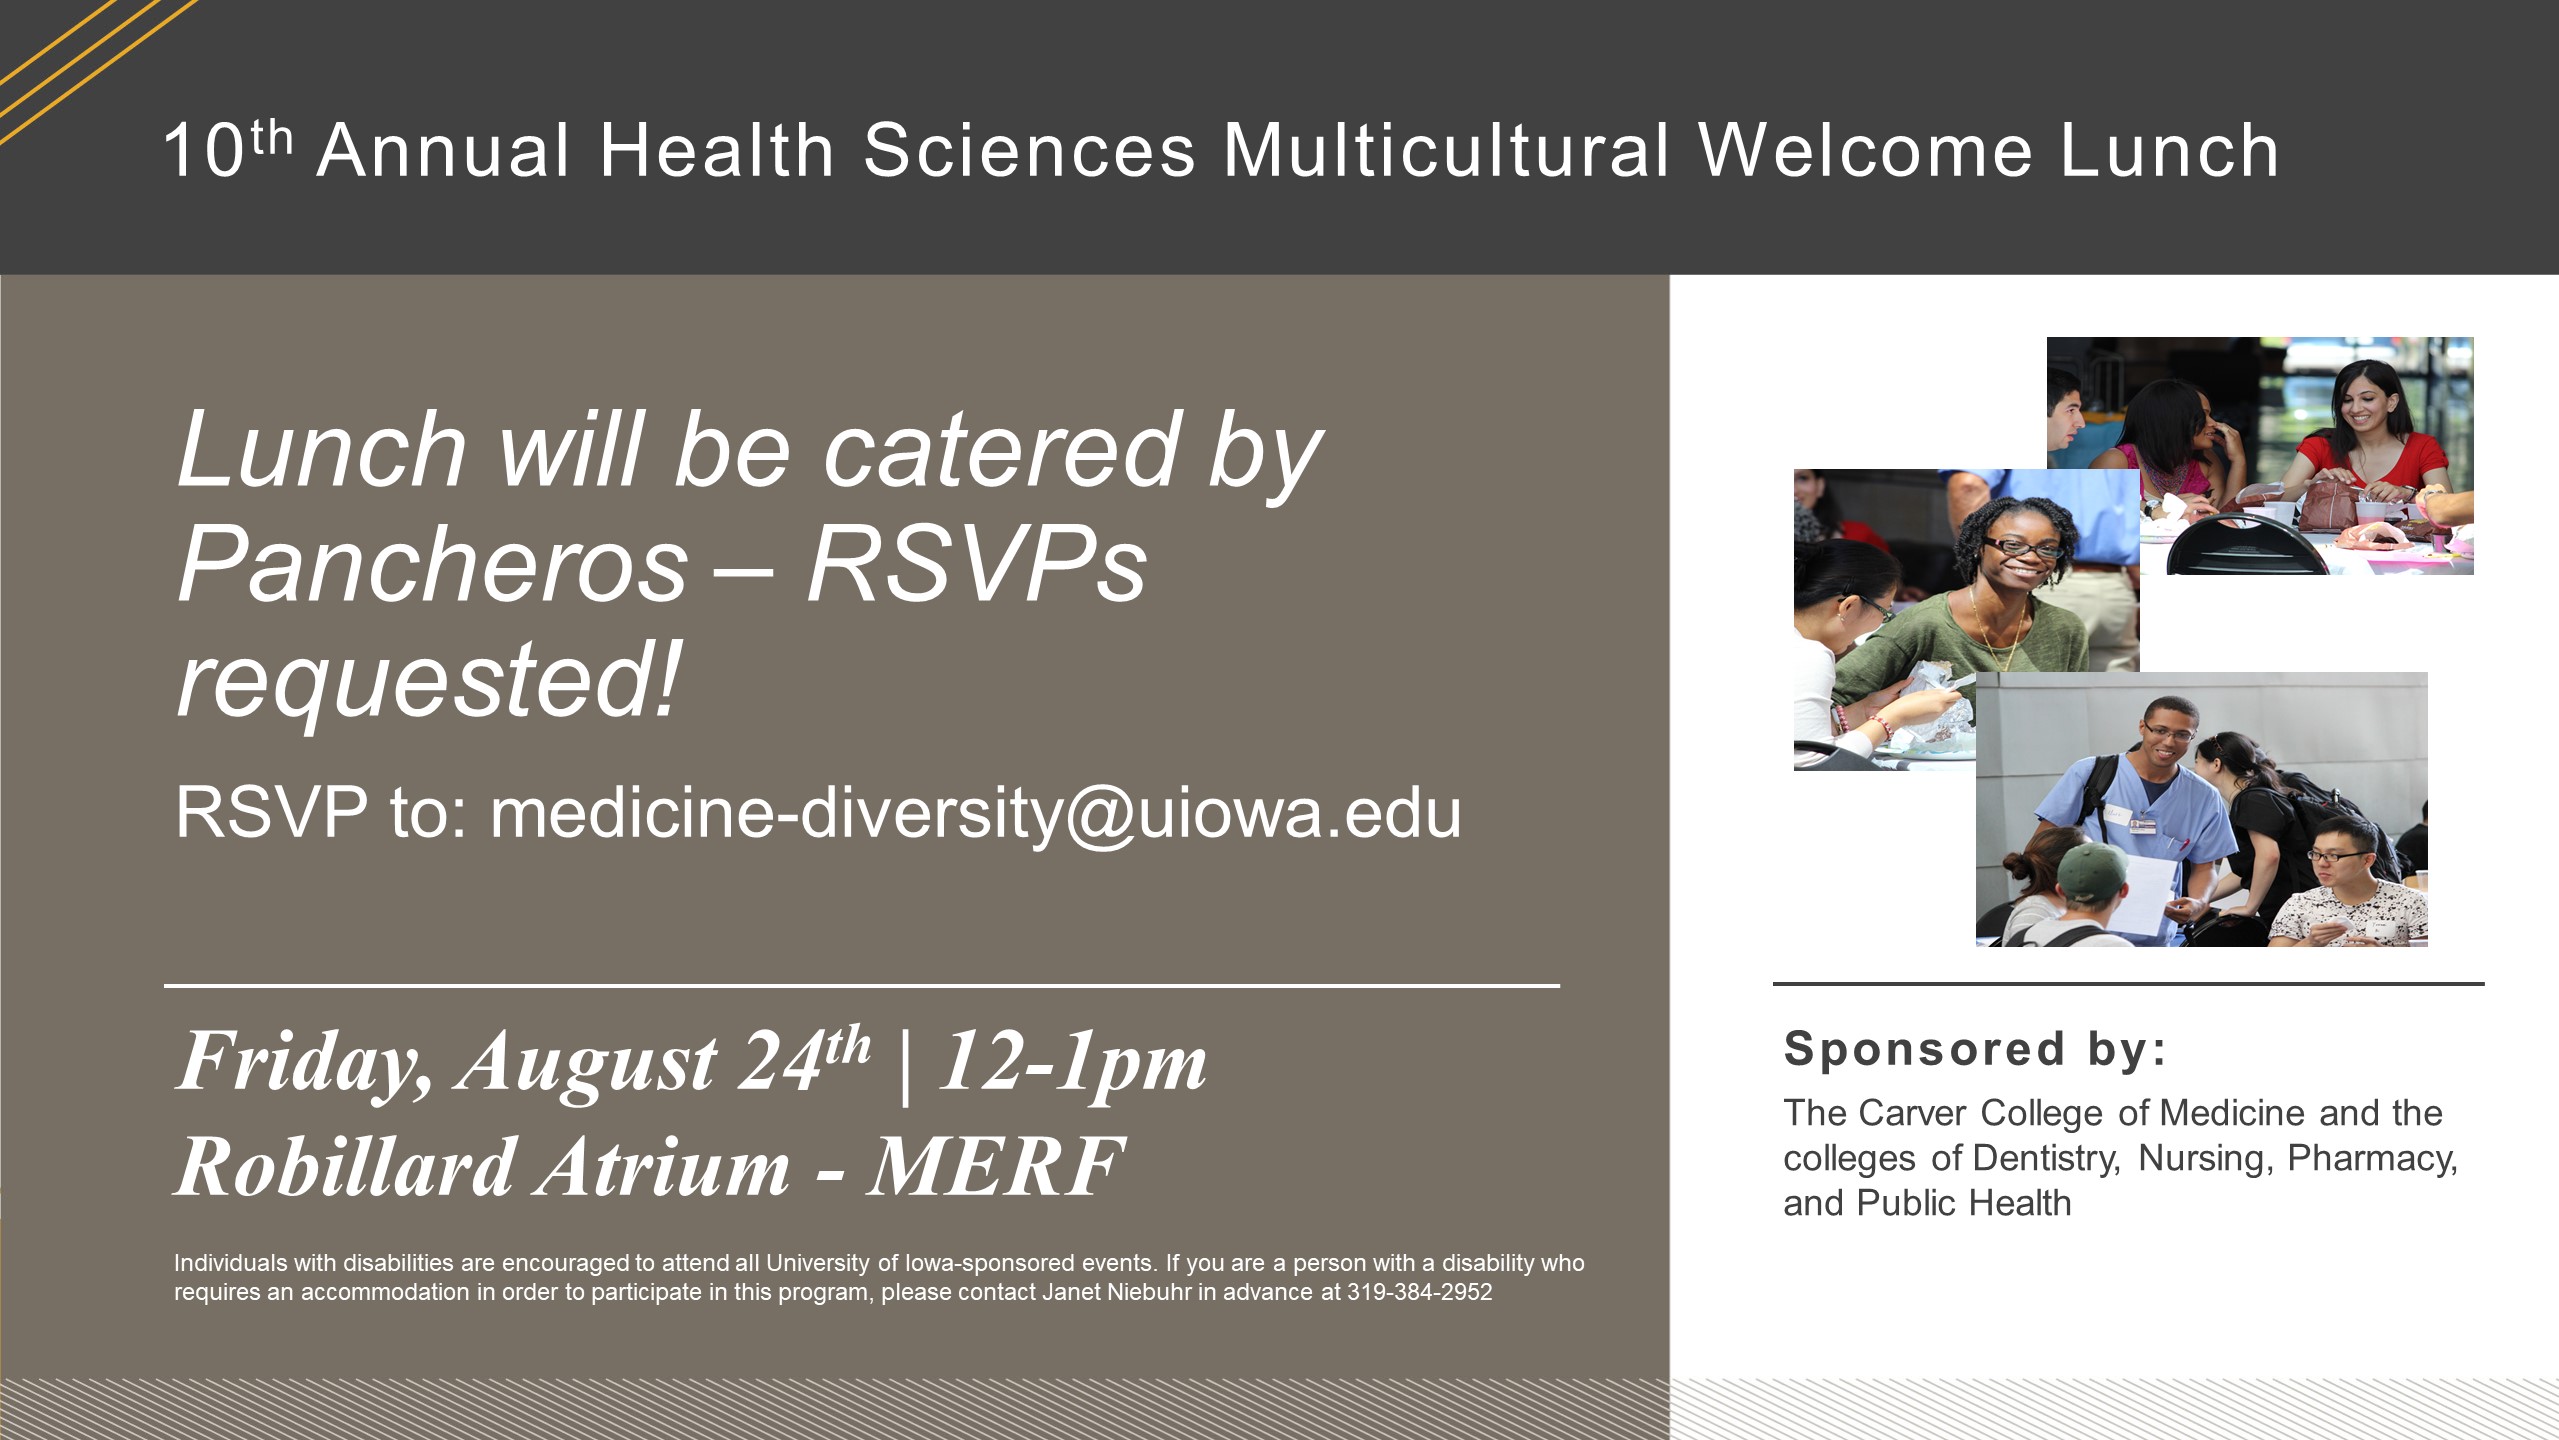 10th Annual Health Sciences Multicultural Welcome Lunch promotional image